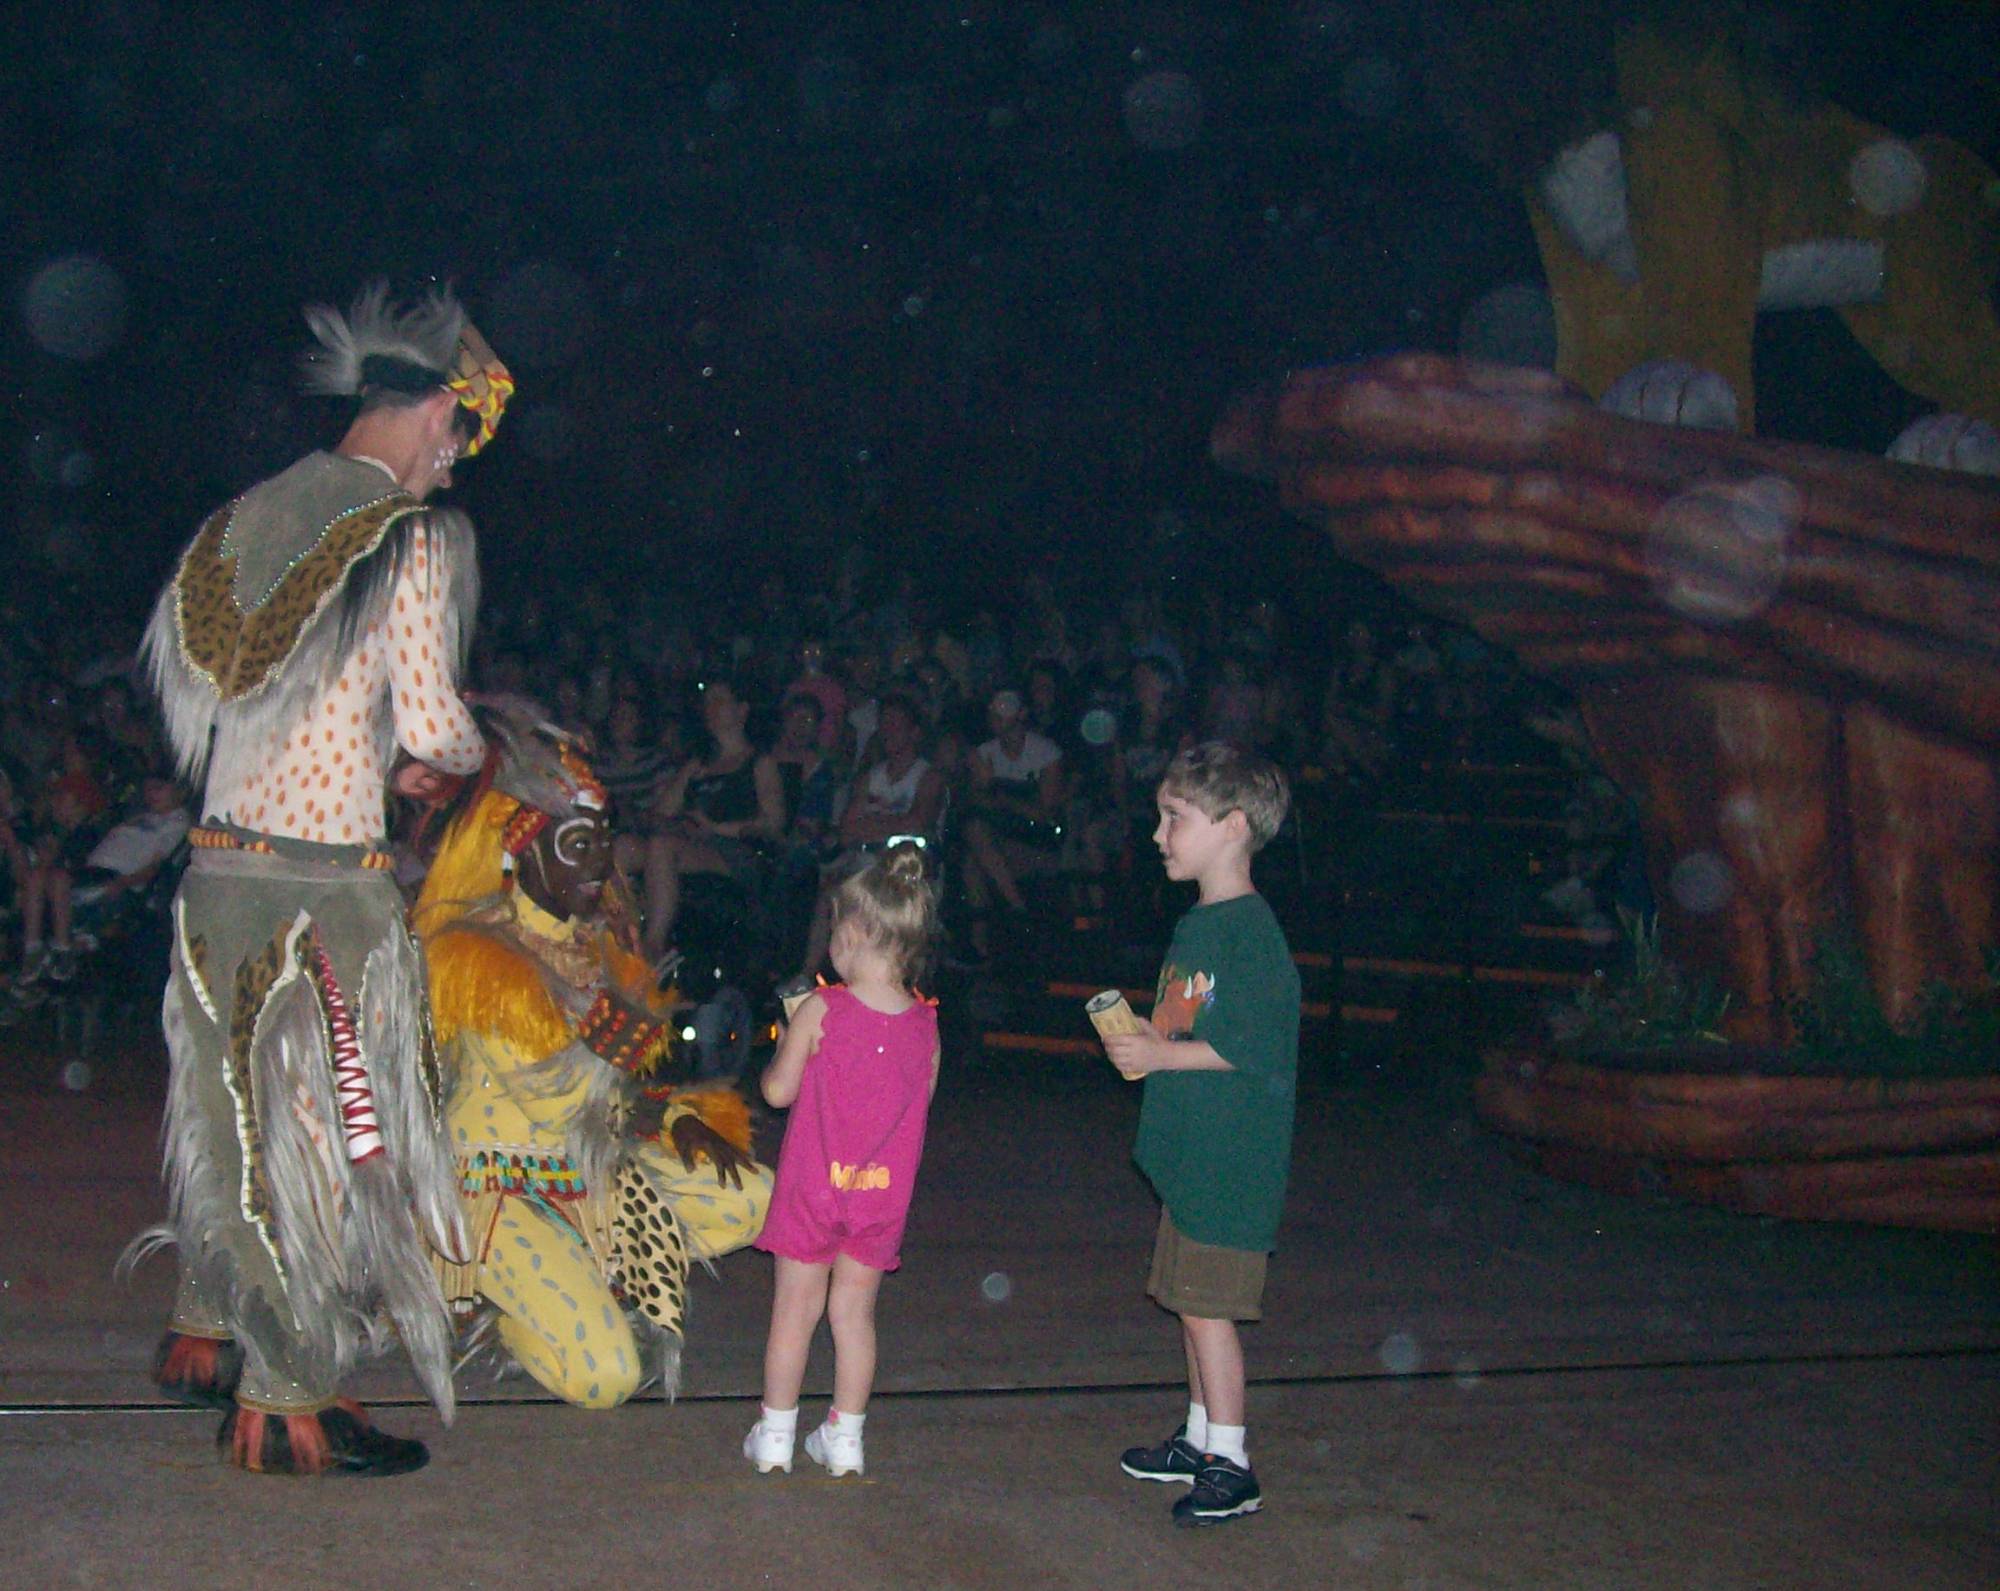 Festival of the Lion King in Camp Minnie-Mickey participants